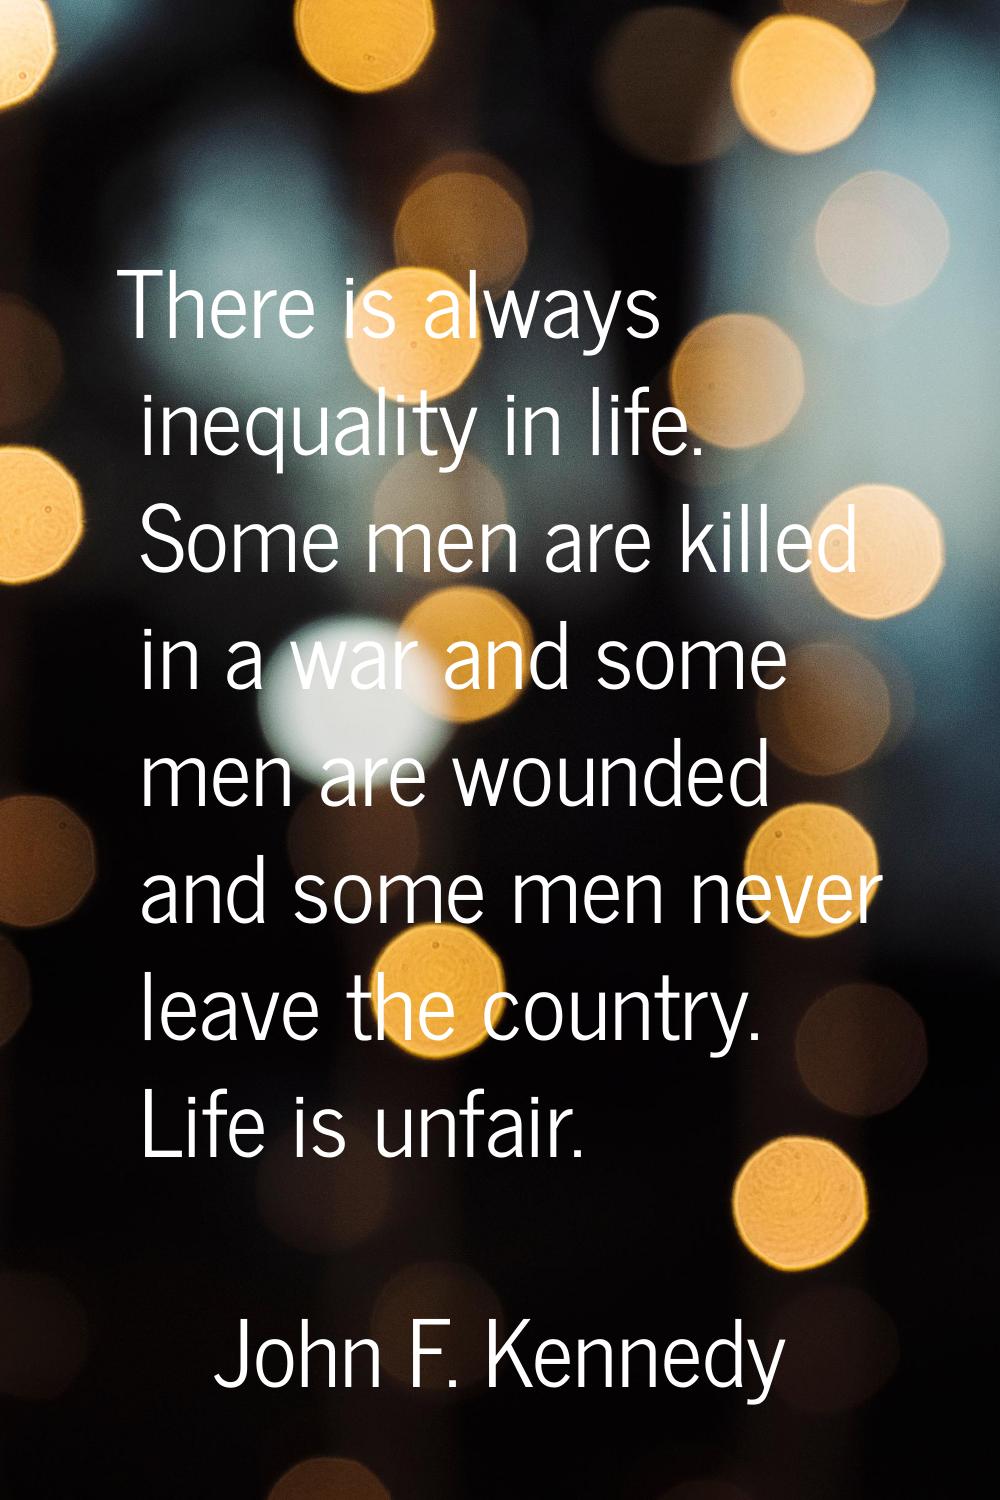 There is always inequality in life. Some men are killed in a war and some men are wounded and some 